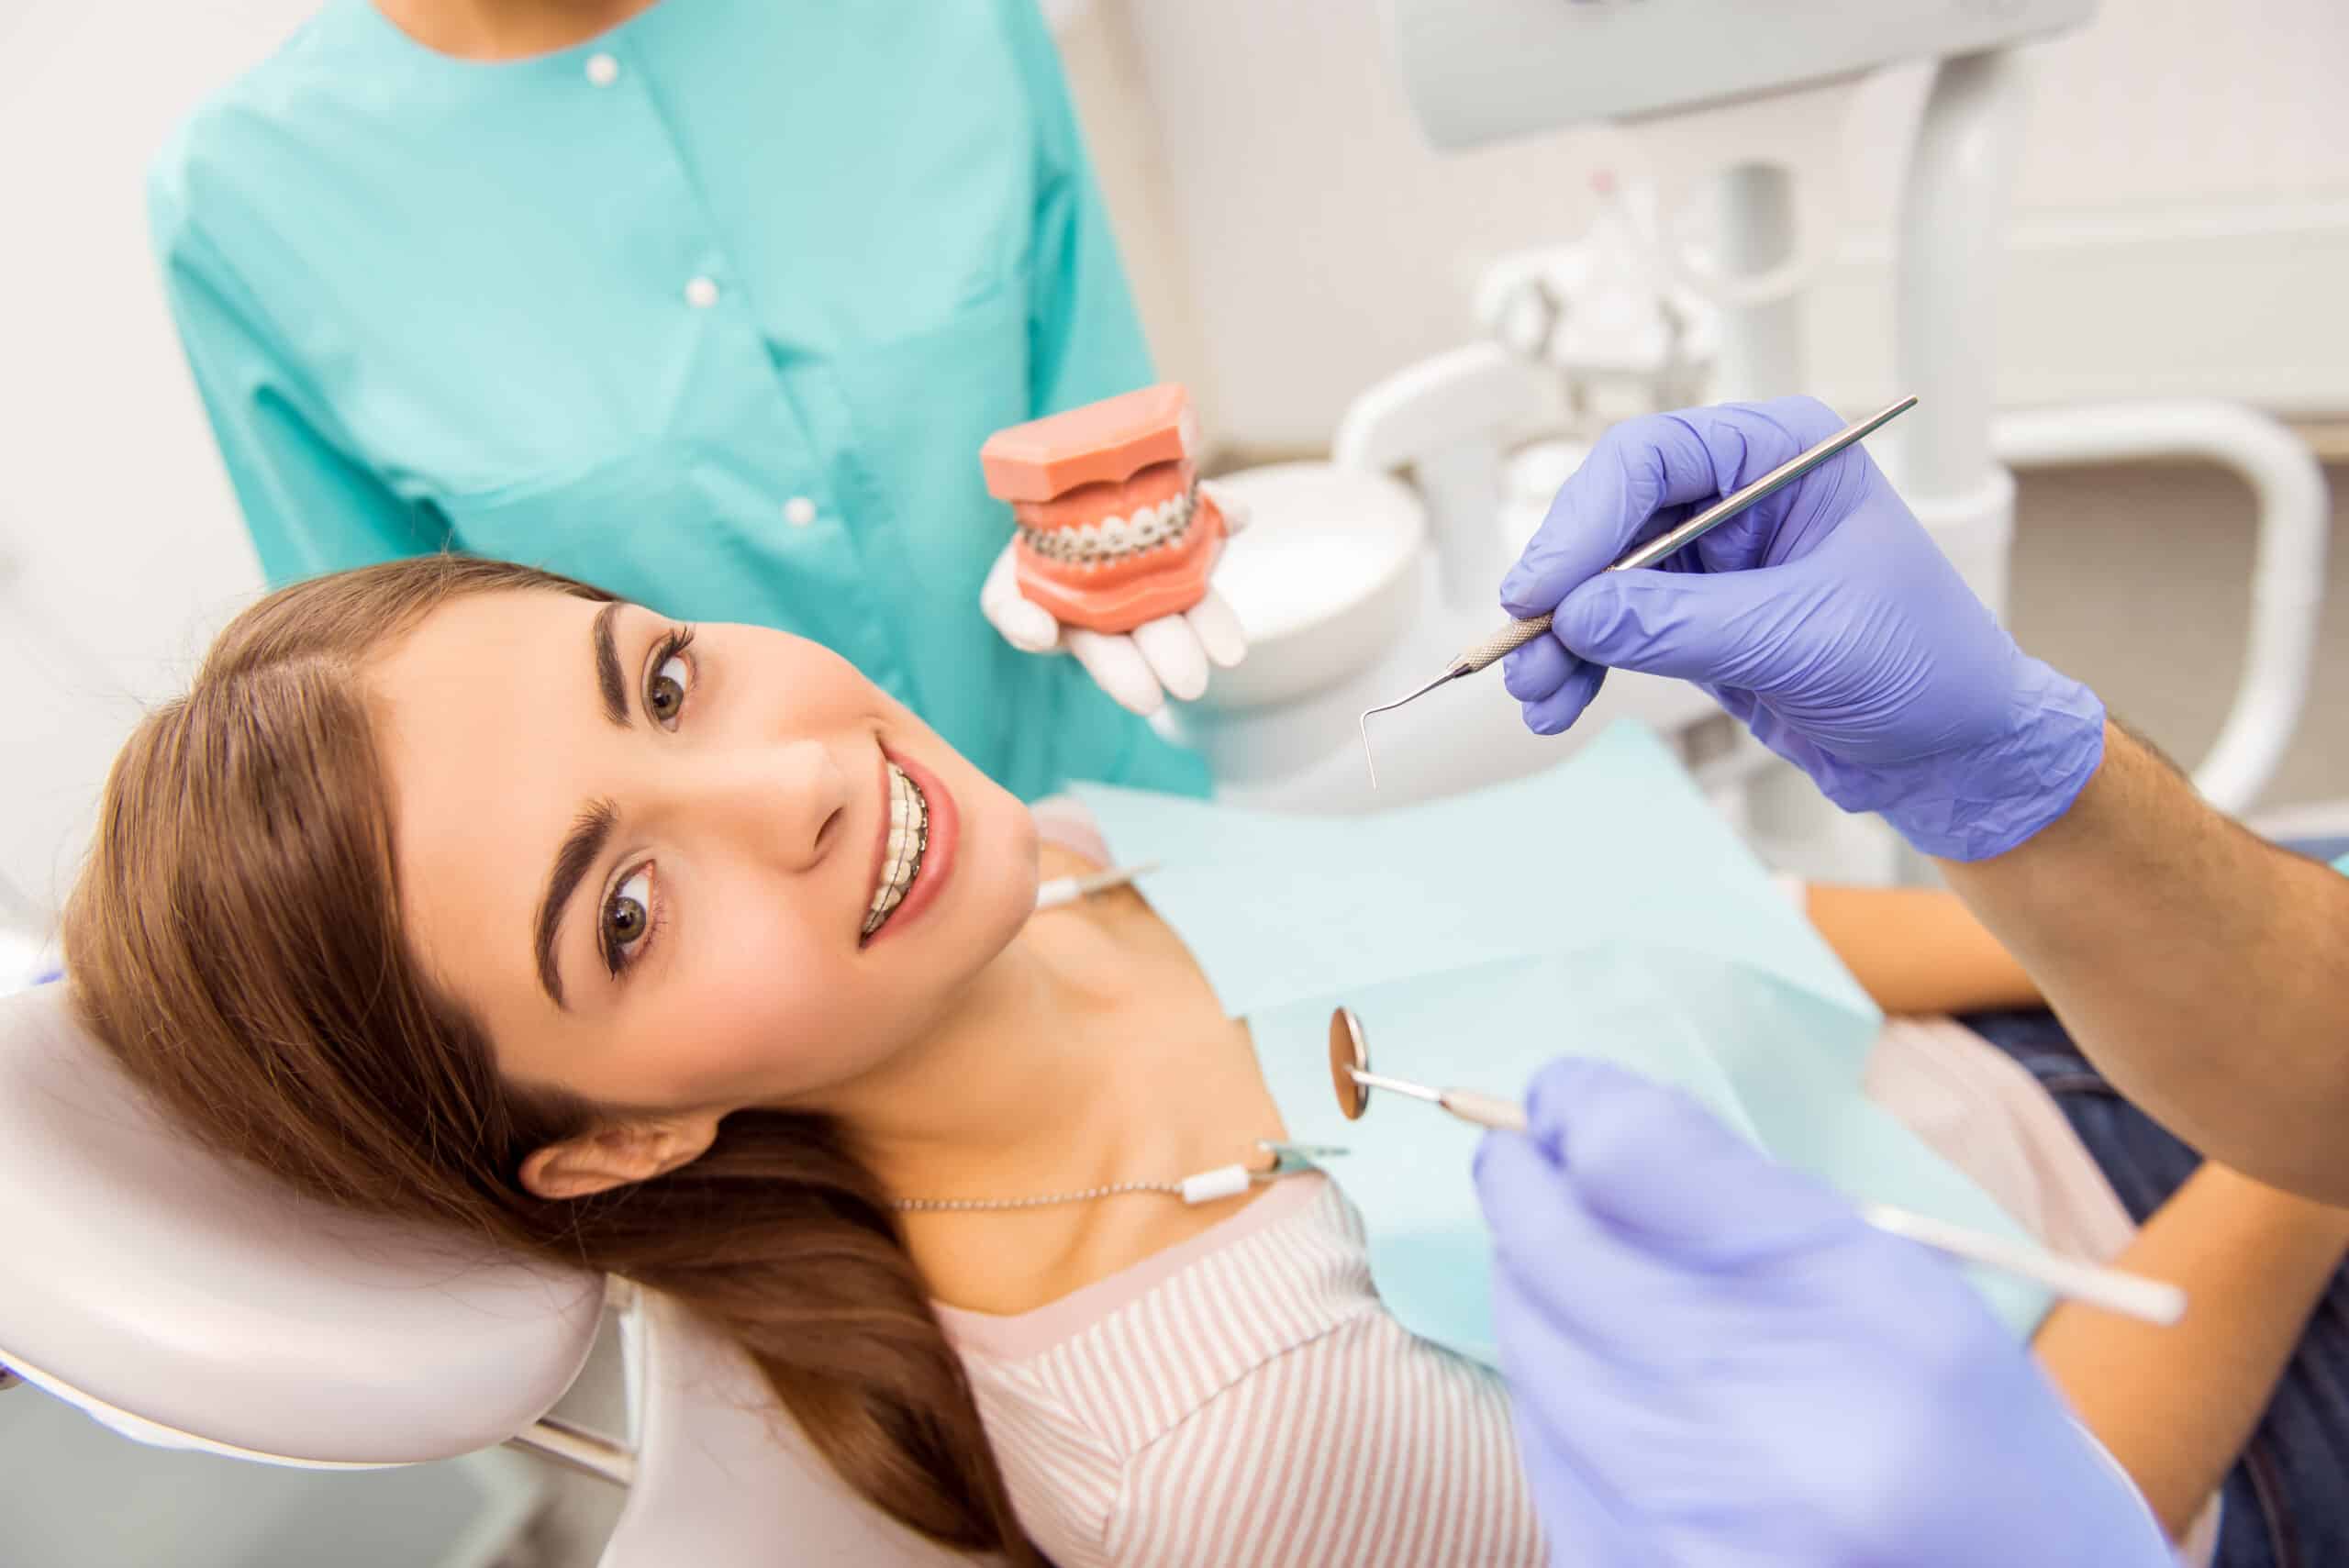 Attractive patient, with braces, treatment in dental, assistant to holding the model teeth